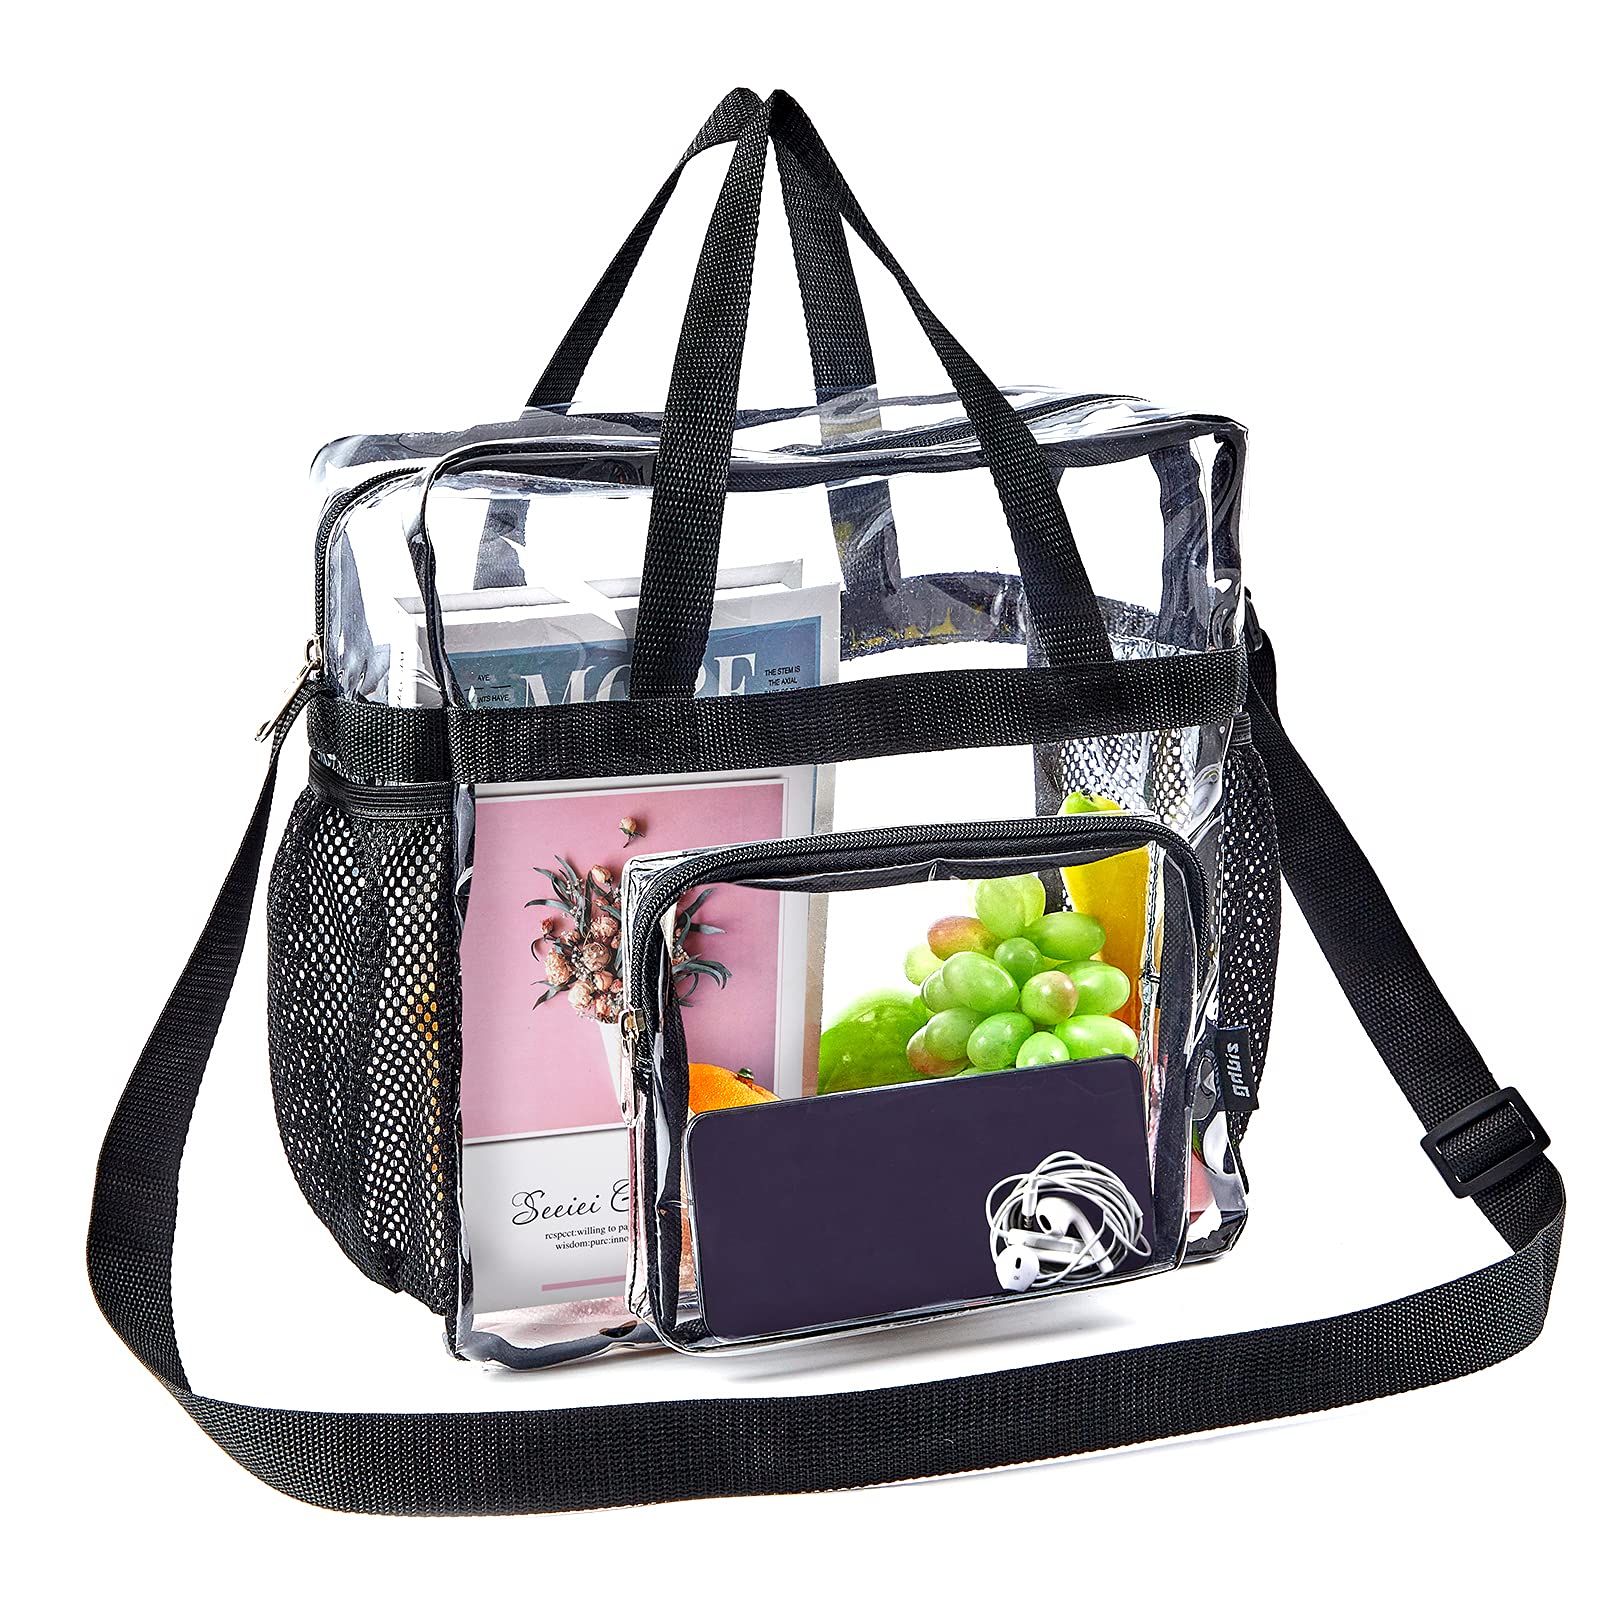 Large Clear Lunch Bag Heavy Duty Clear Lunch Box with Adjustable Straps and